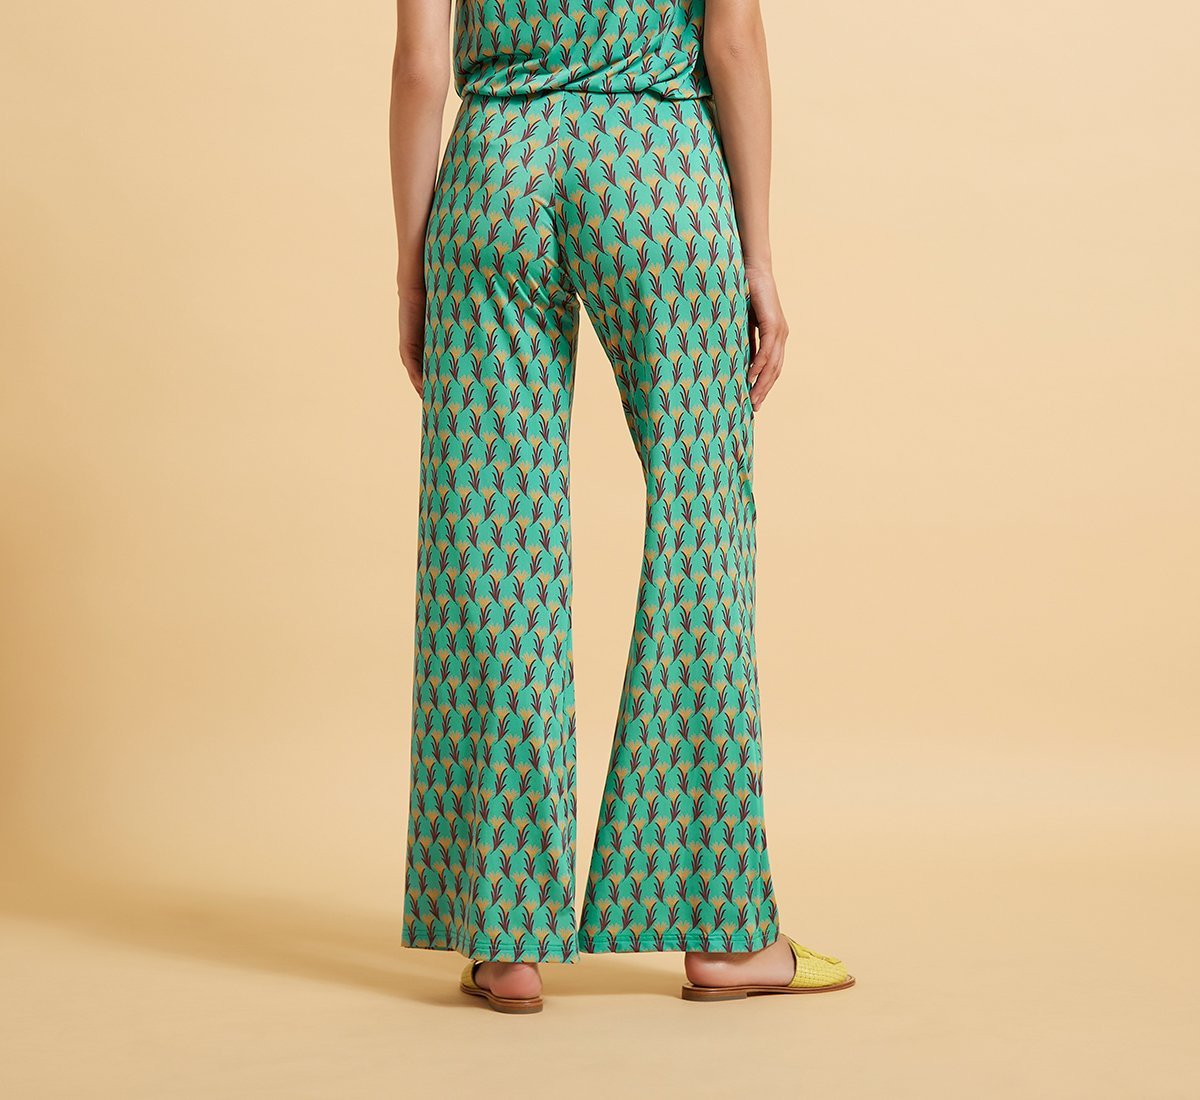 Pants with Patterned Print